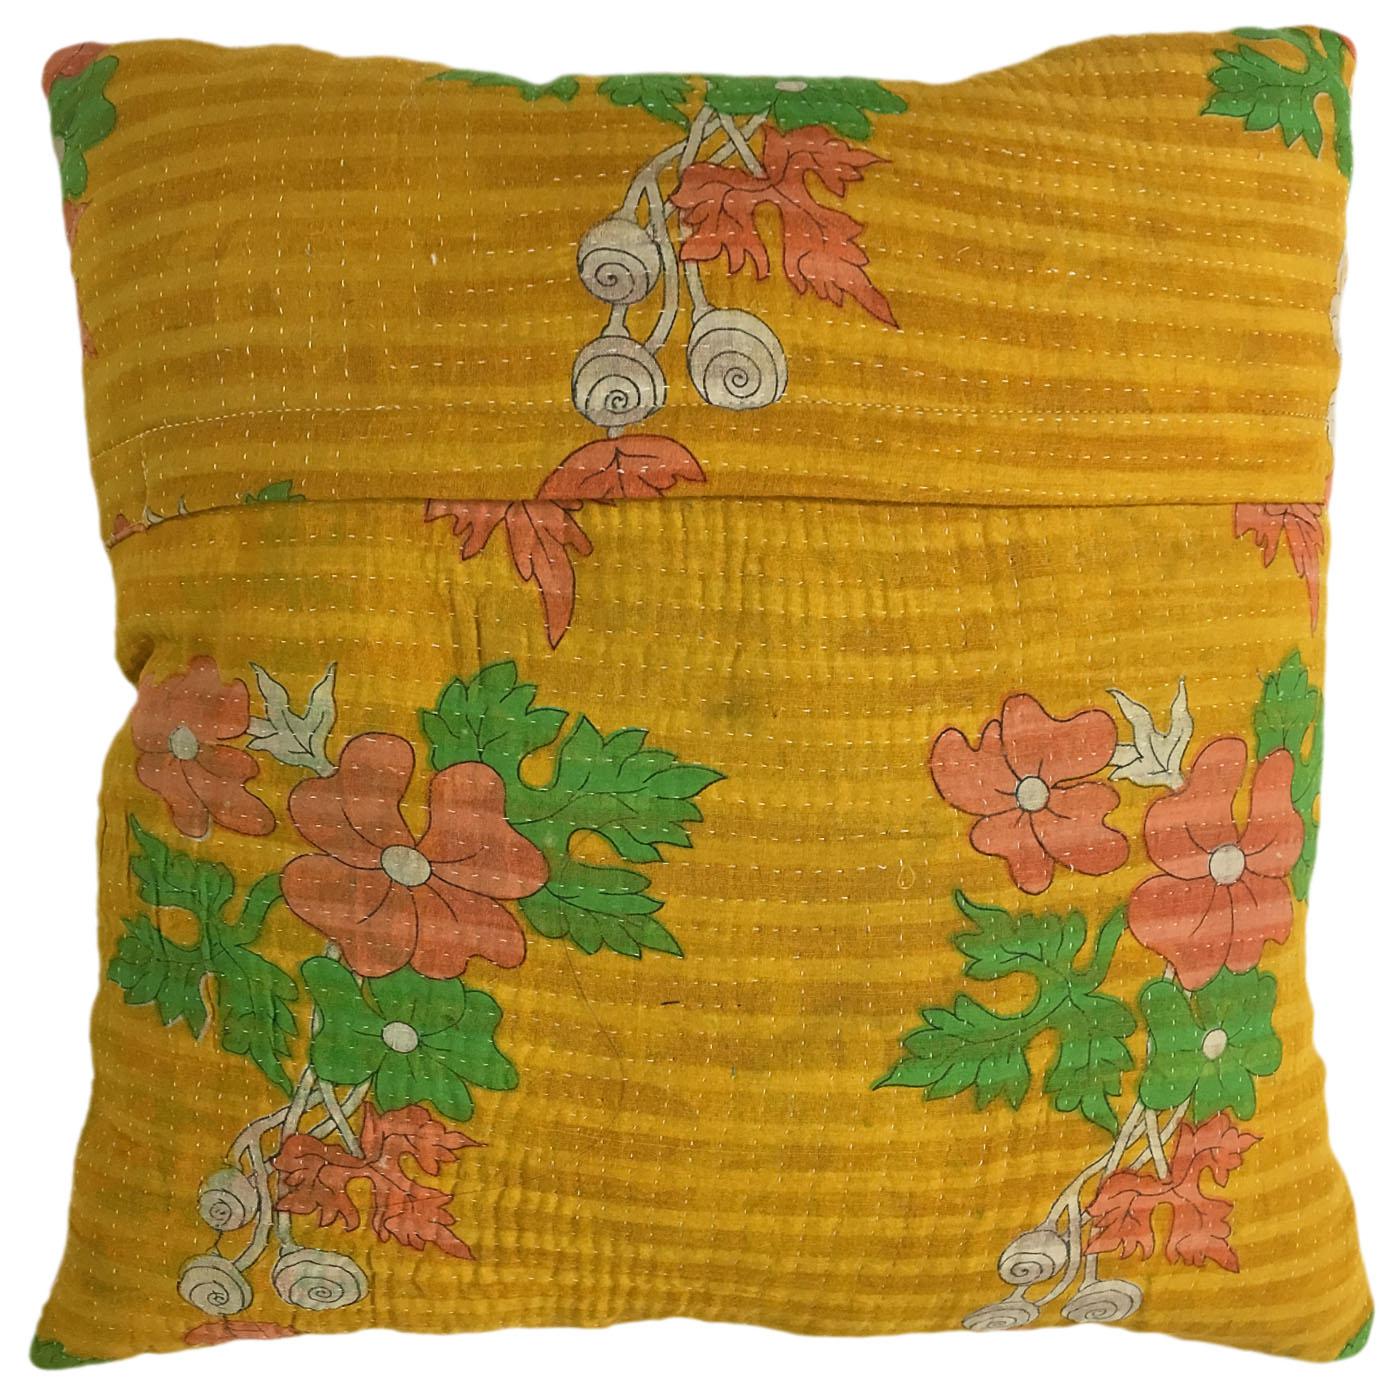 Details about   Indian Kantha Printed Cotton Cushion Cover Hand Embroidered Cotton Pillow Case 